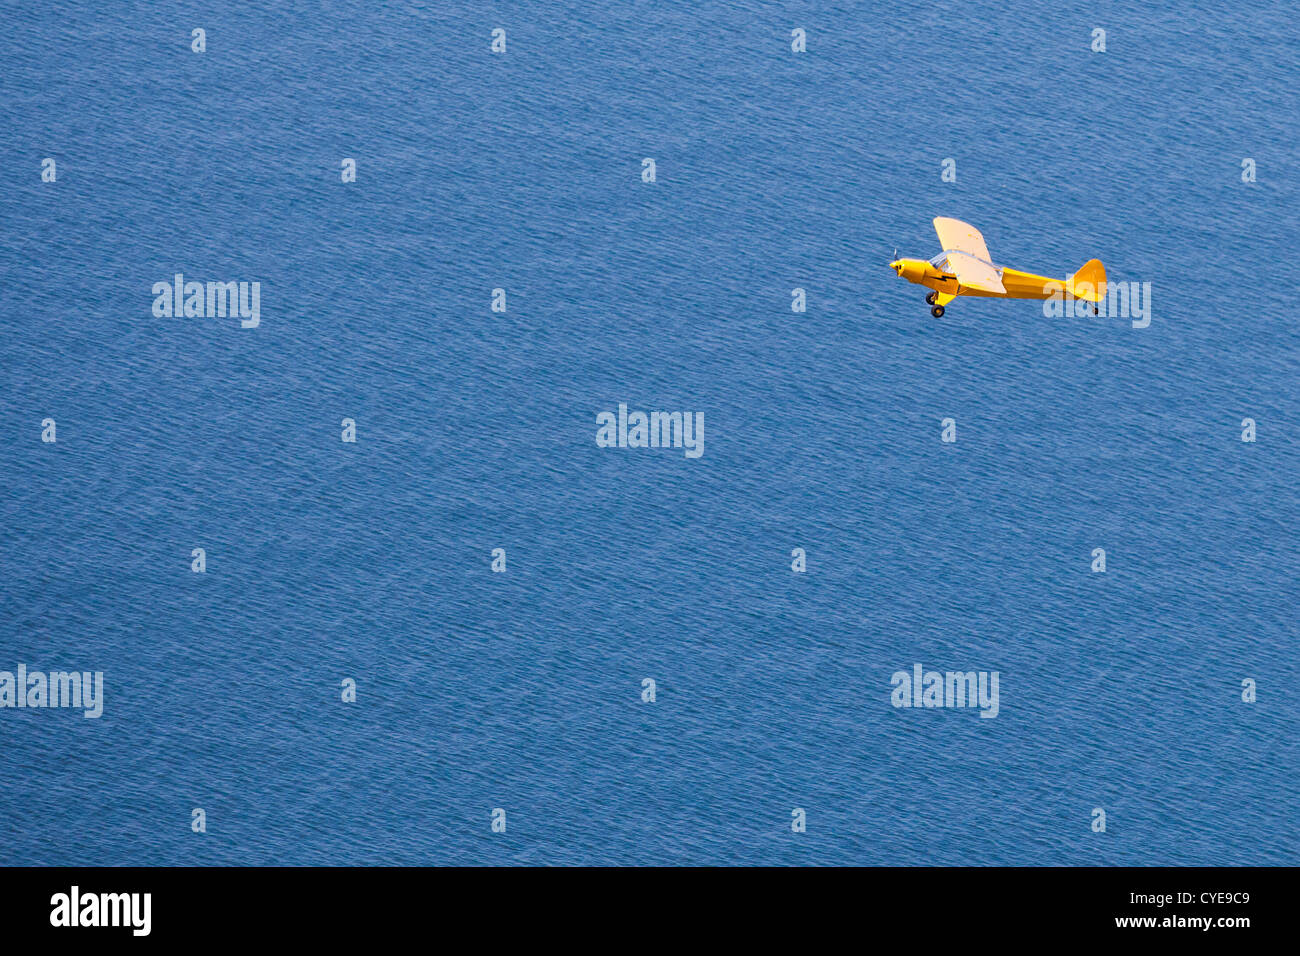 The Netherlands, Scheveningen, The Hague or in Dutch: Den Haag. Small airplane, a Piper Cub, flying over the North Sea. Aerial. Stock Photo